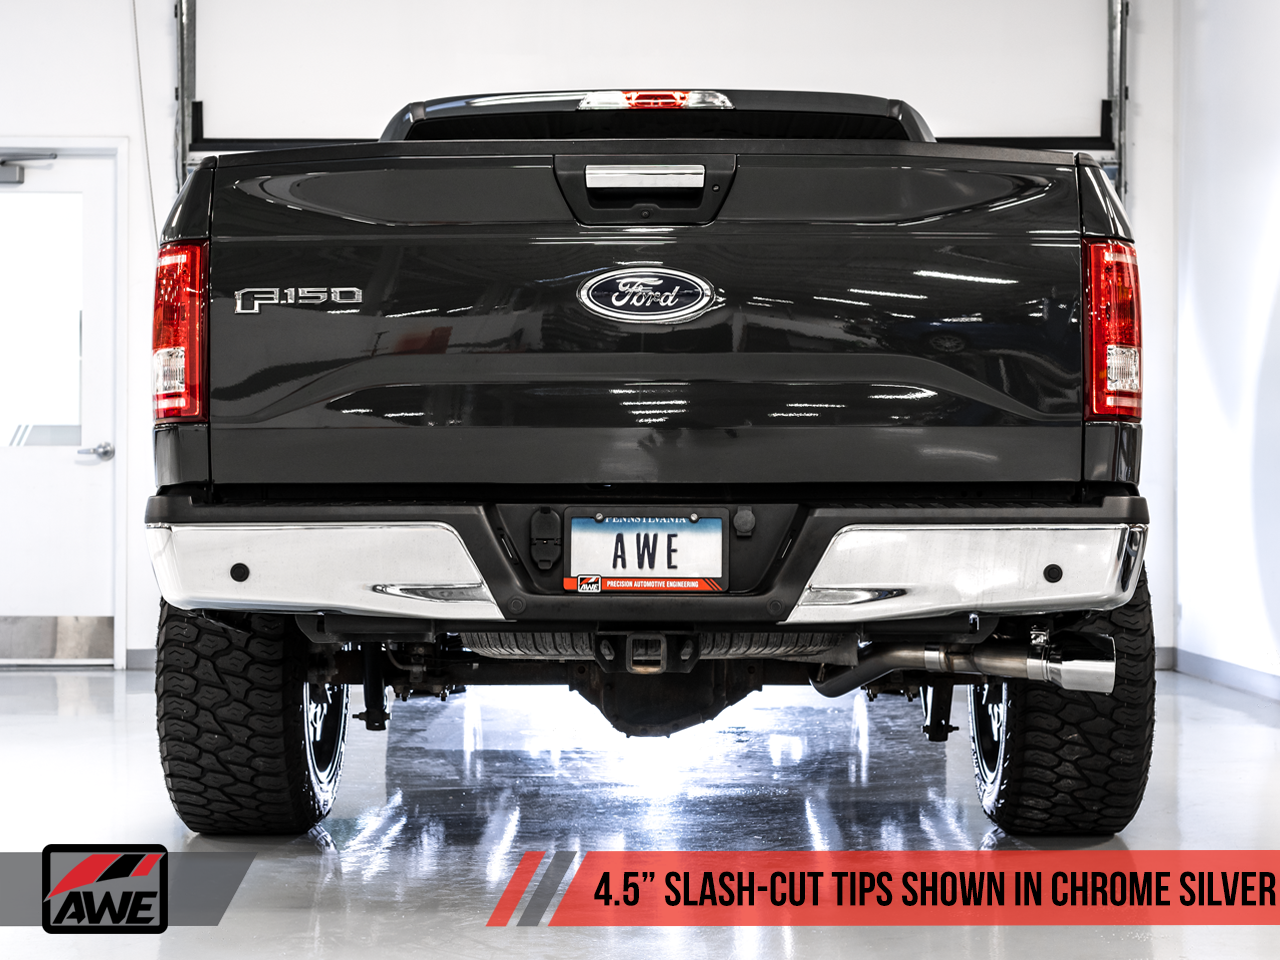 0FG Single Exit Exhaust for '15-'20 F-150 - 4.5" Chrome Silver Tips